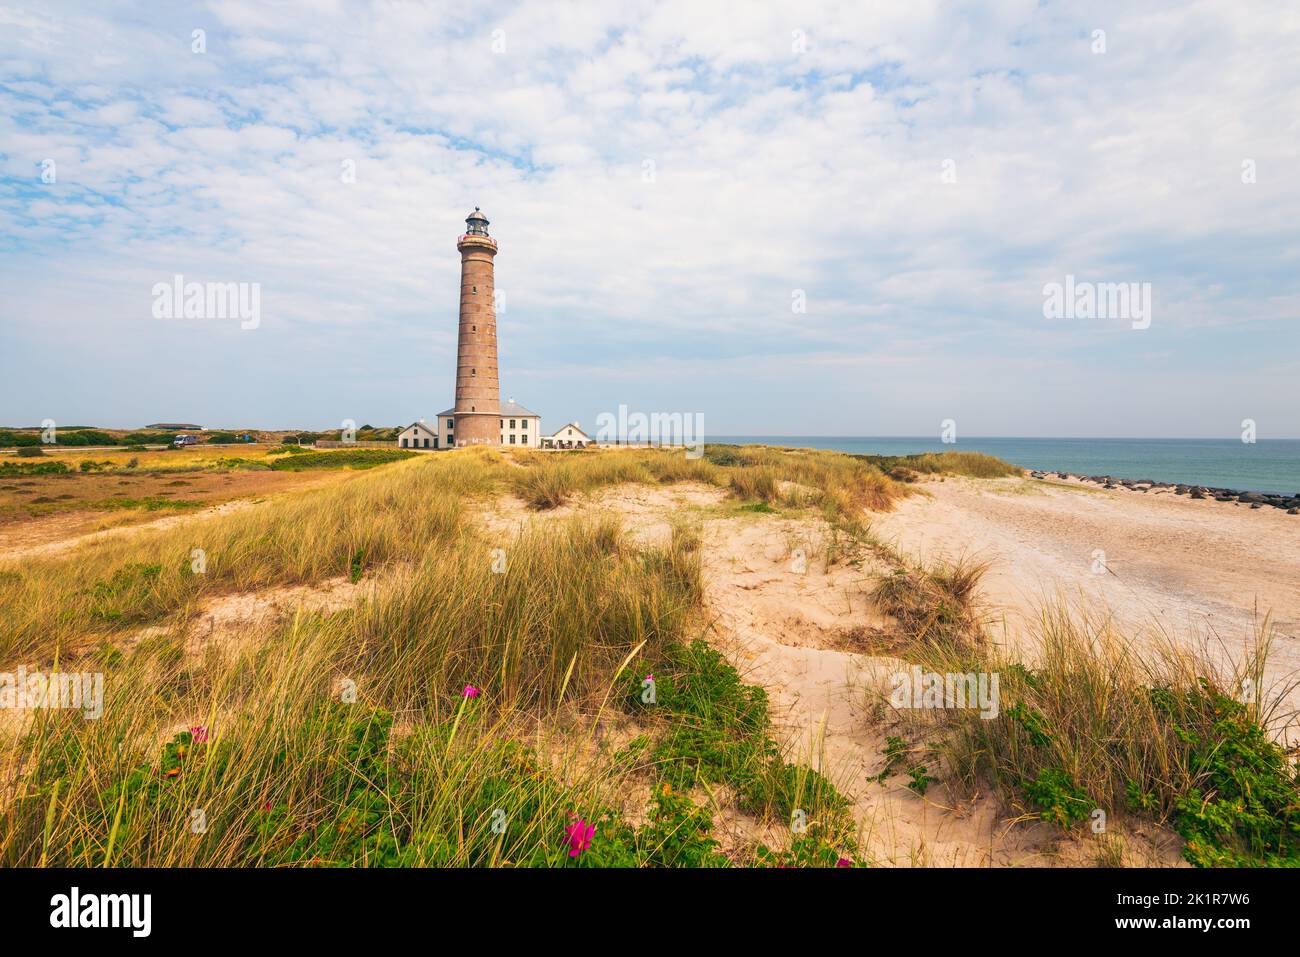 Skagen Lighthouse is an active lighthouse 4 km northeast of Skagen in the far north of Jutland, Denmark. It was brought into operation in 1858. Stock Photo